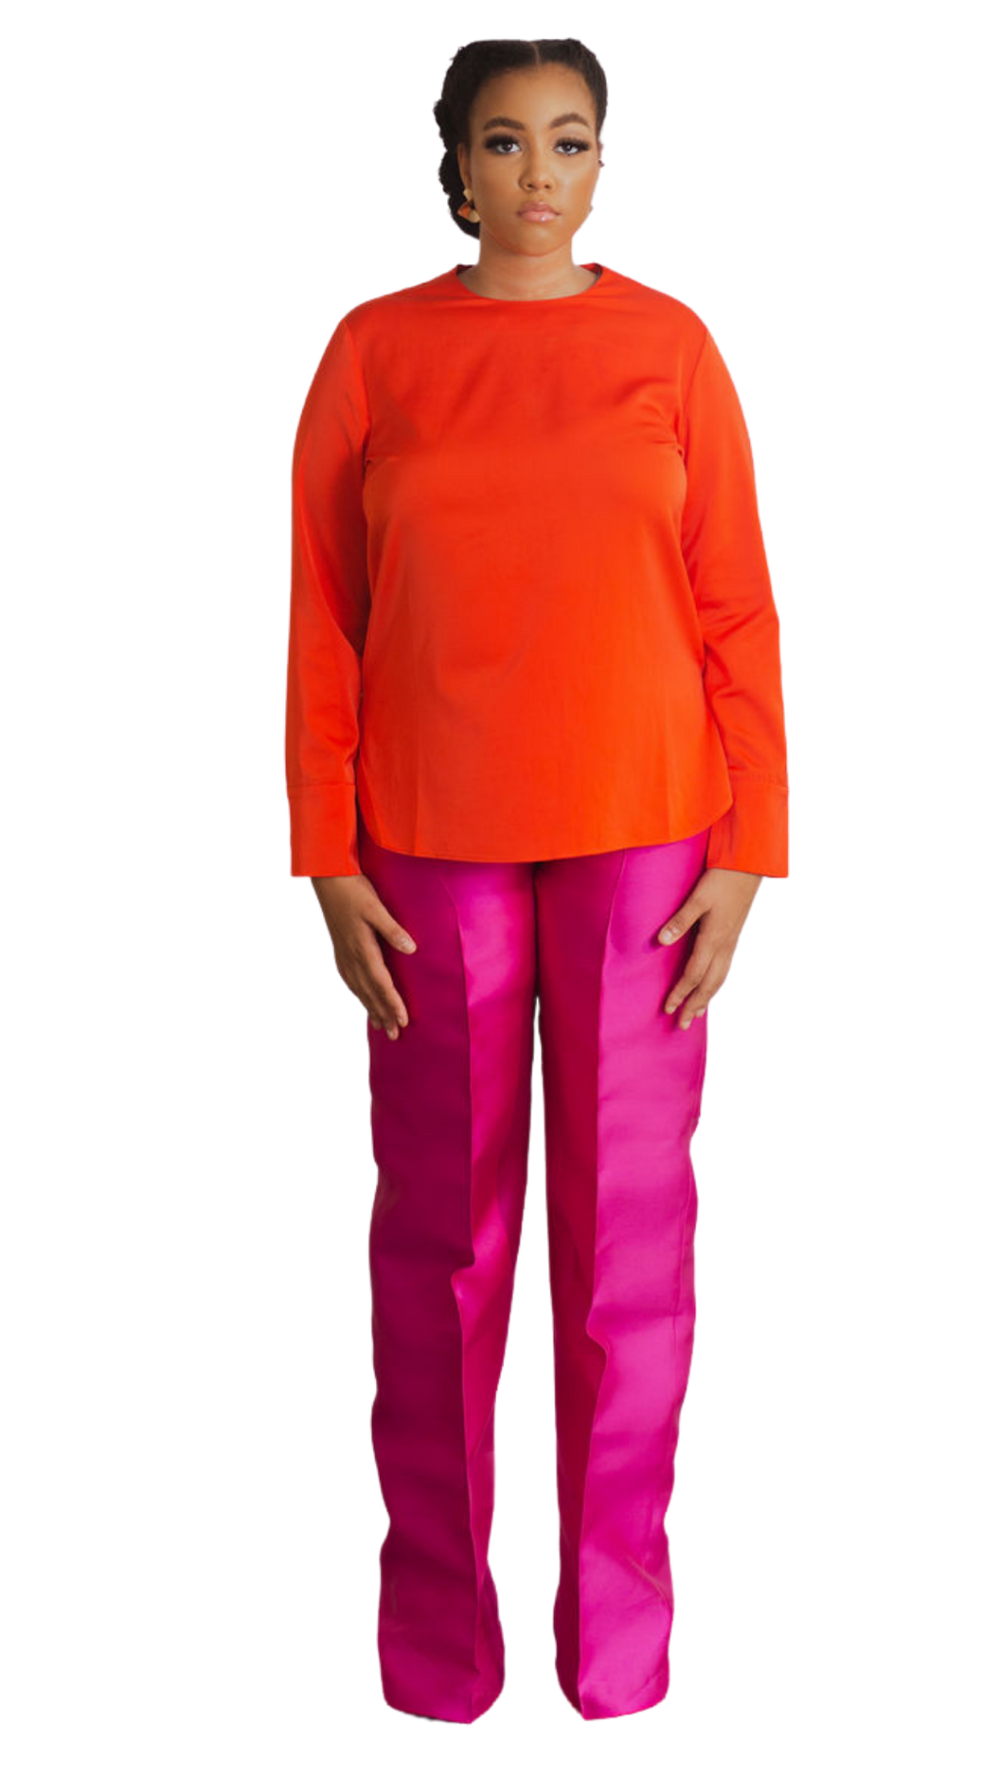 A model wearing an Orange Top and a Magenta straight-cut pant